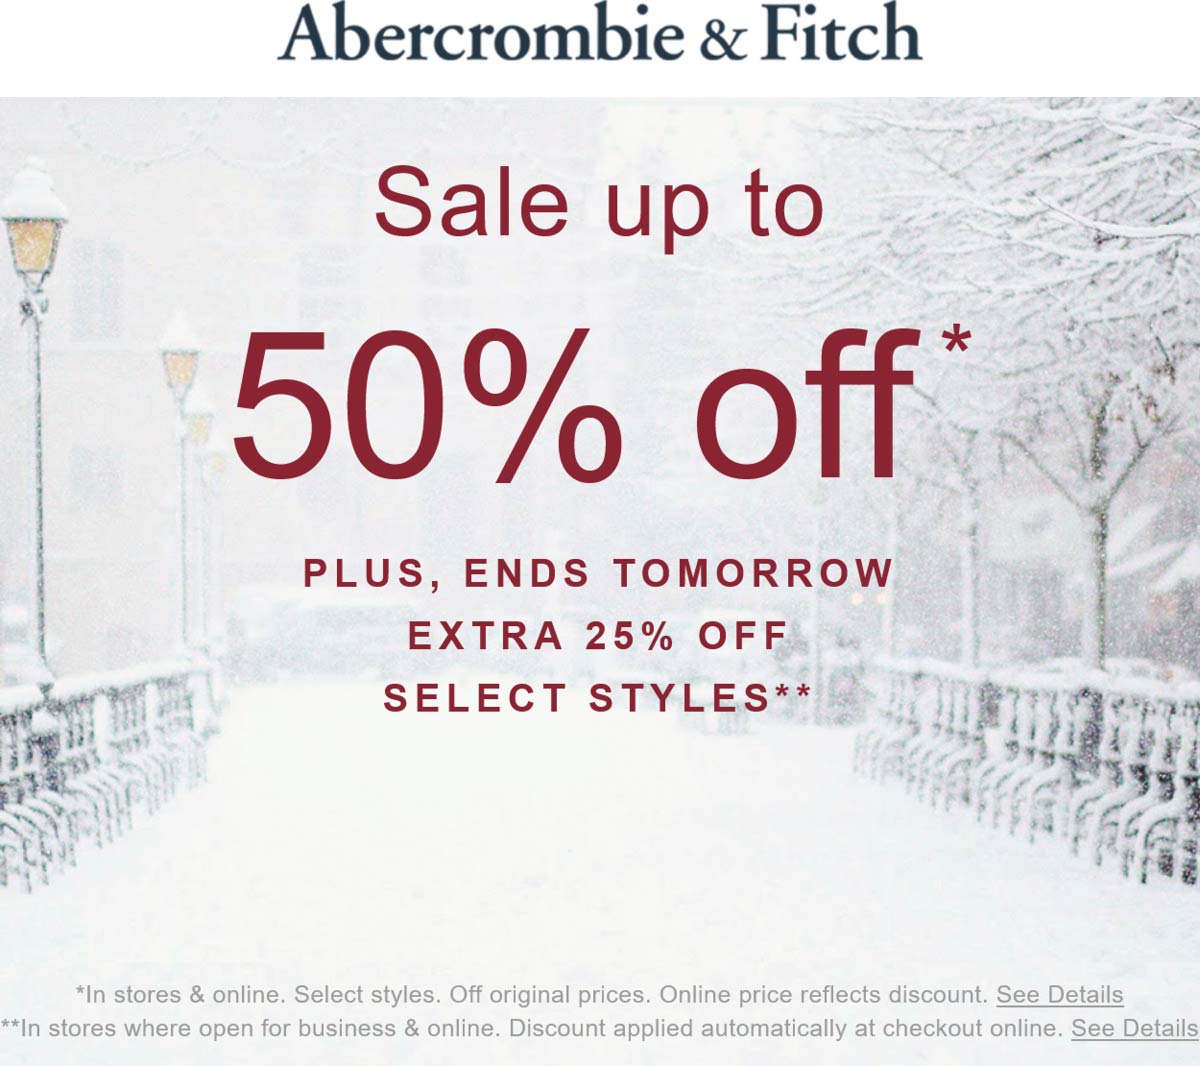 Extra 25 off sale items & more at Abercrombie & Fitch 